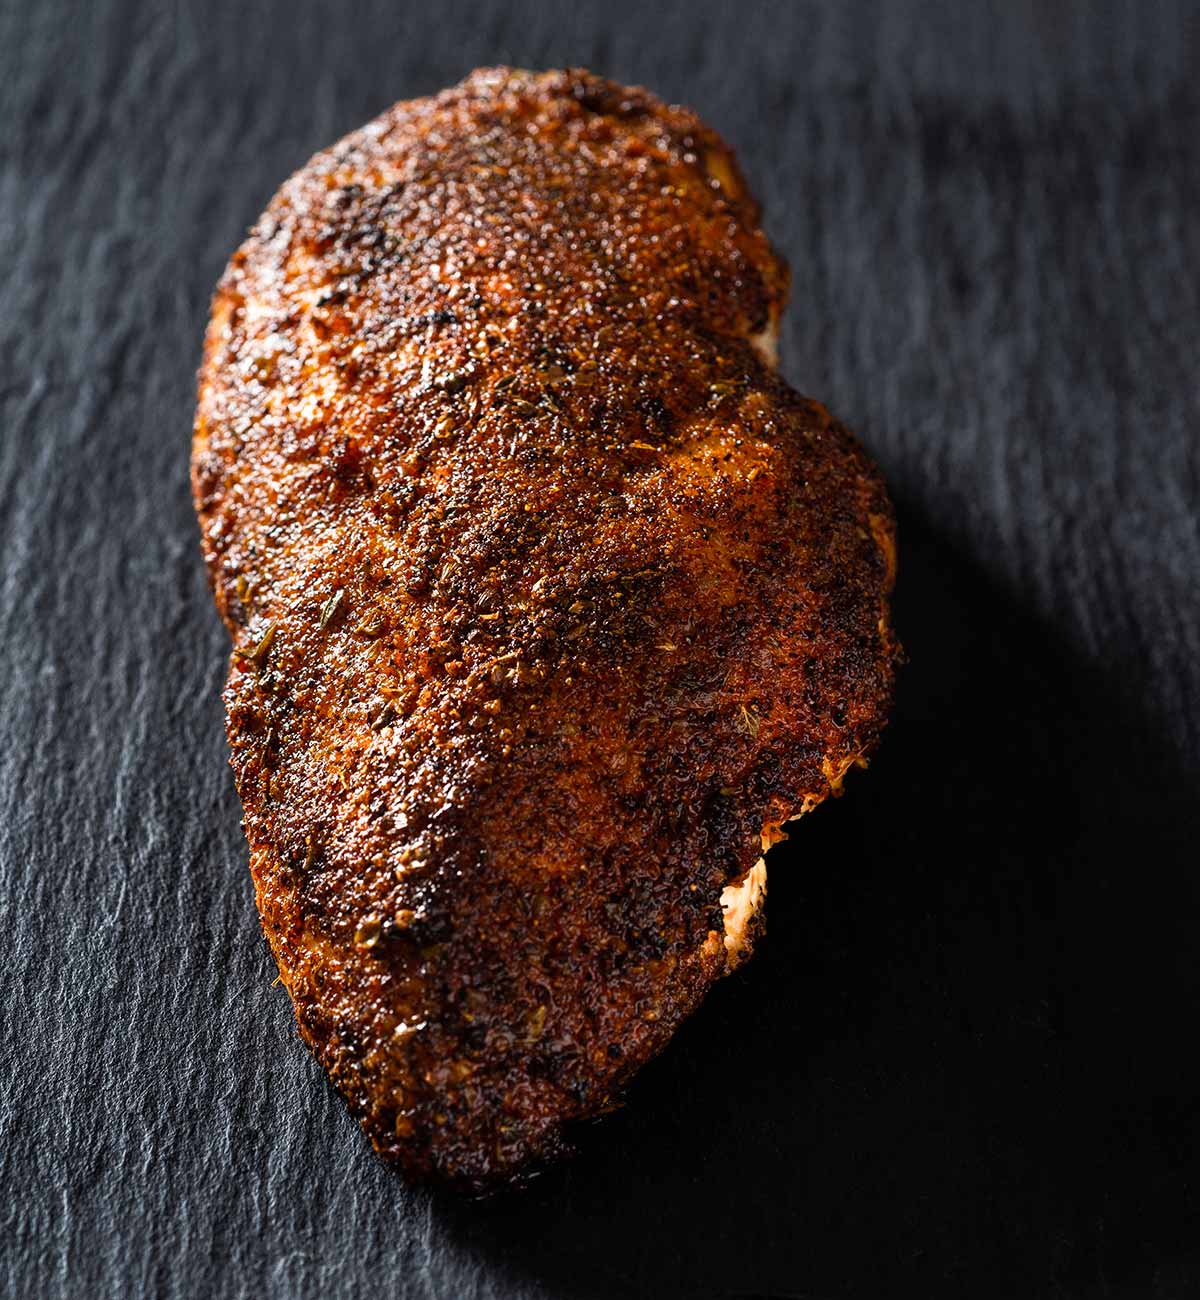 Spice-rubbed, cooked chicken breast on a cutting surface.